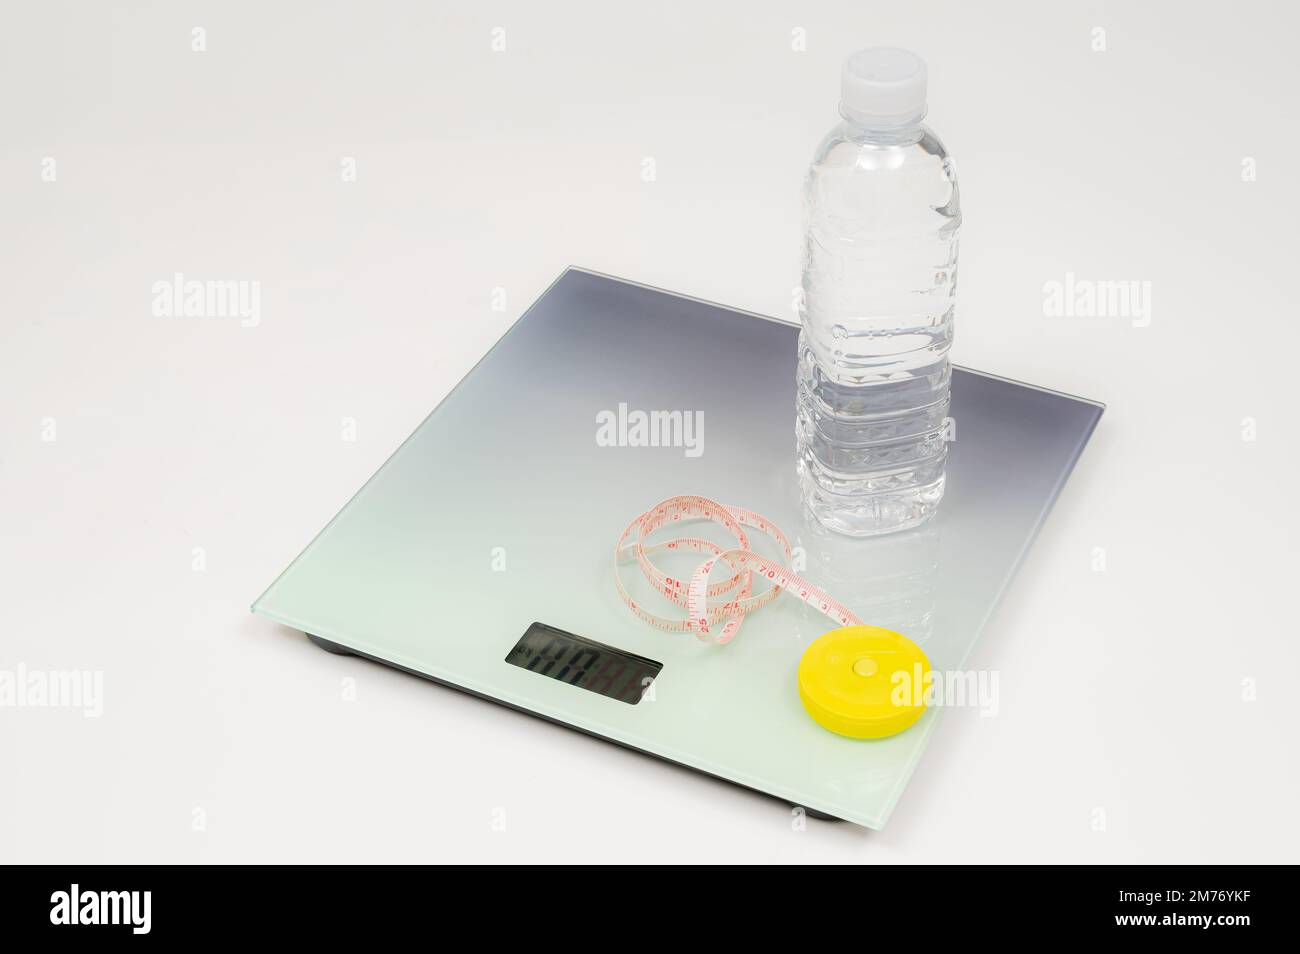 Weight scale, tape measure and water bottle isolated on white background Stock Photo